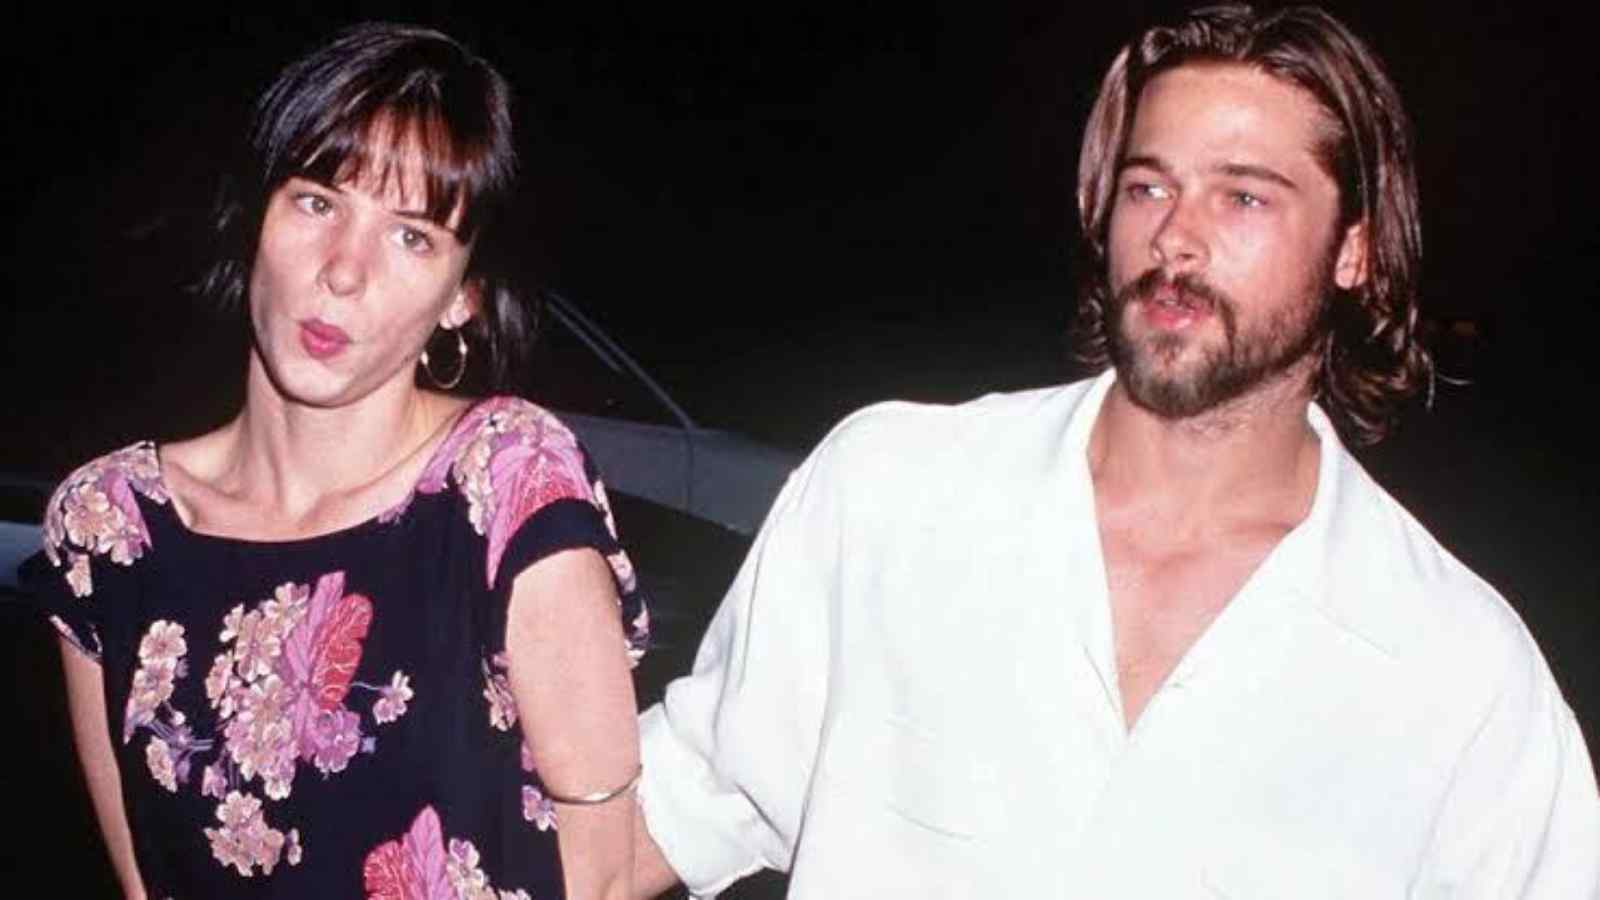 Brad Pitt's dating history also include his then 17-year-old Girlfriend, Juliette Lewis